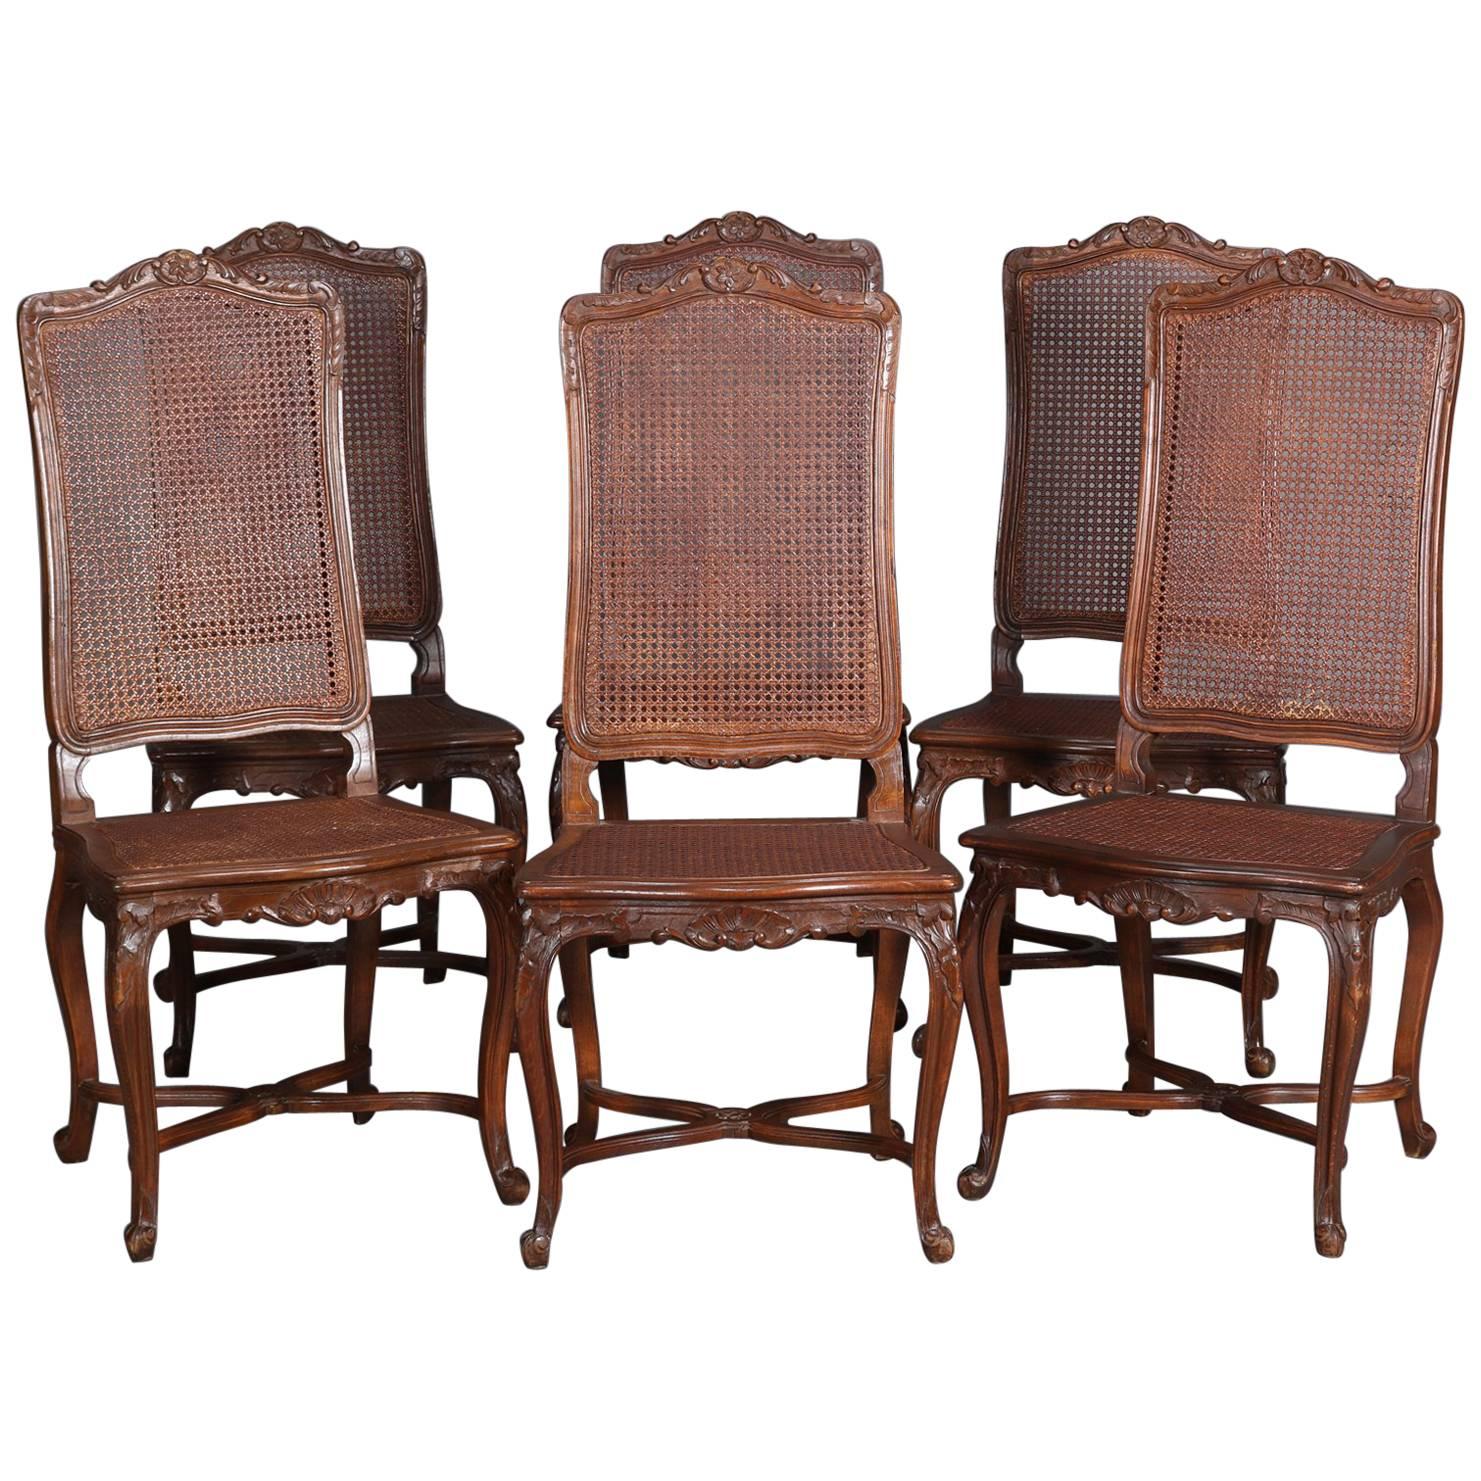 Six Antique French Louis XVI Carved Mahogany Caned Tall Back Dining Chairs